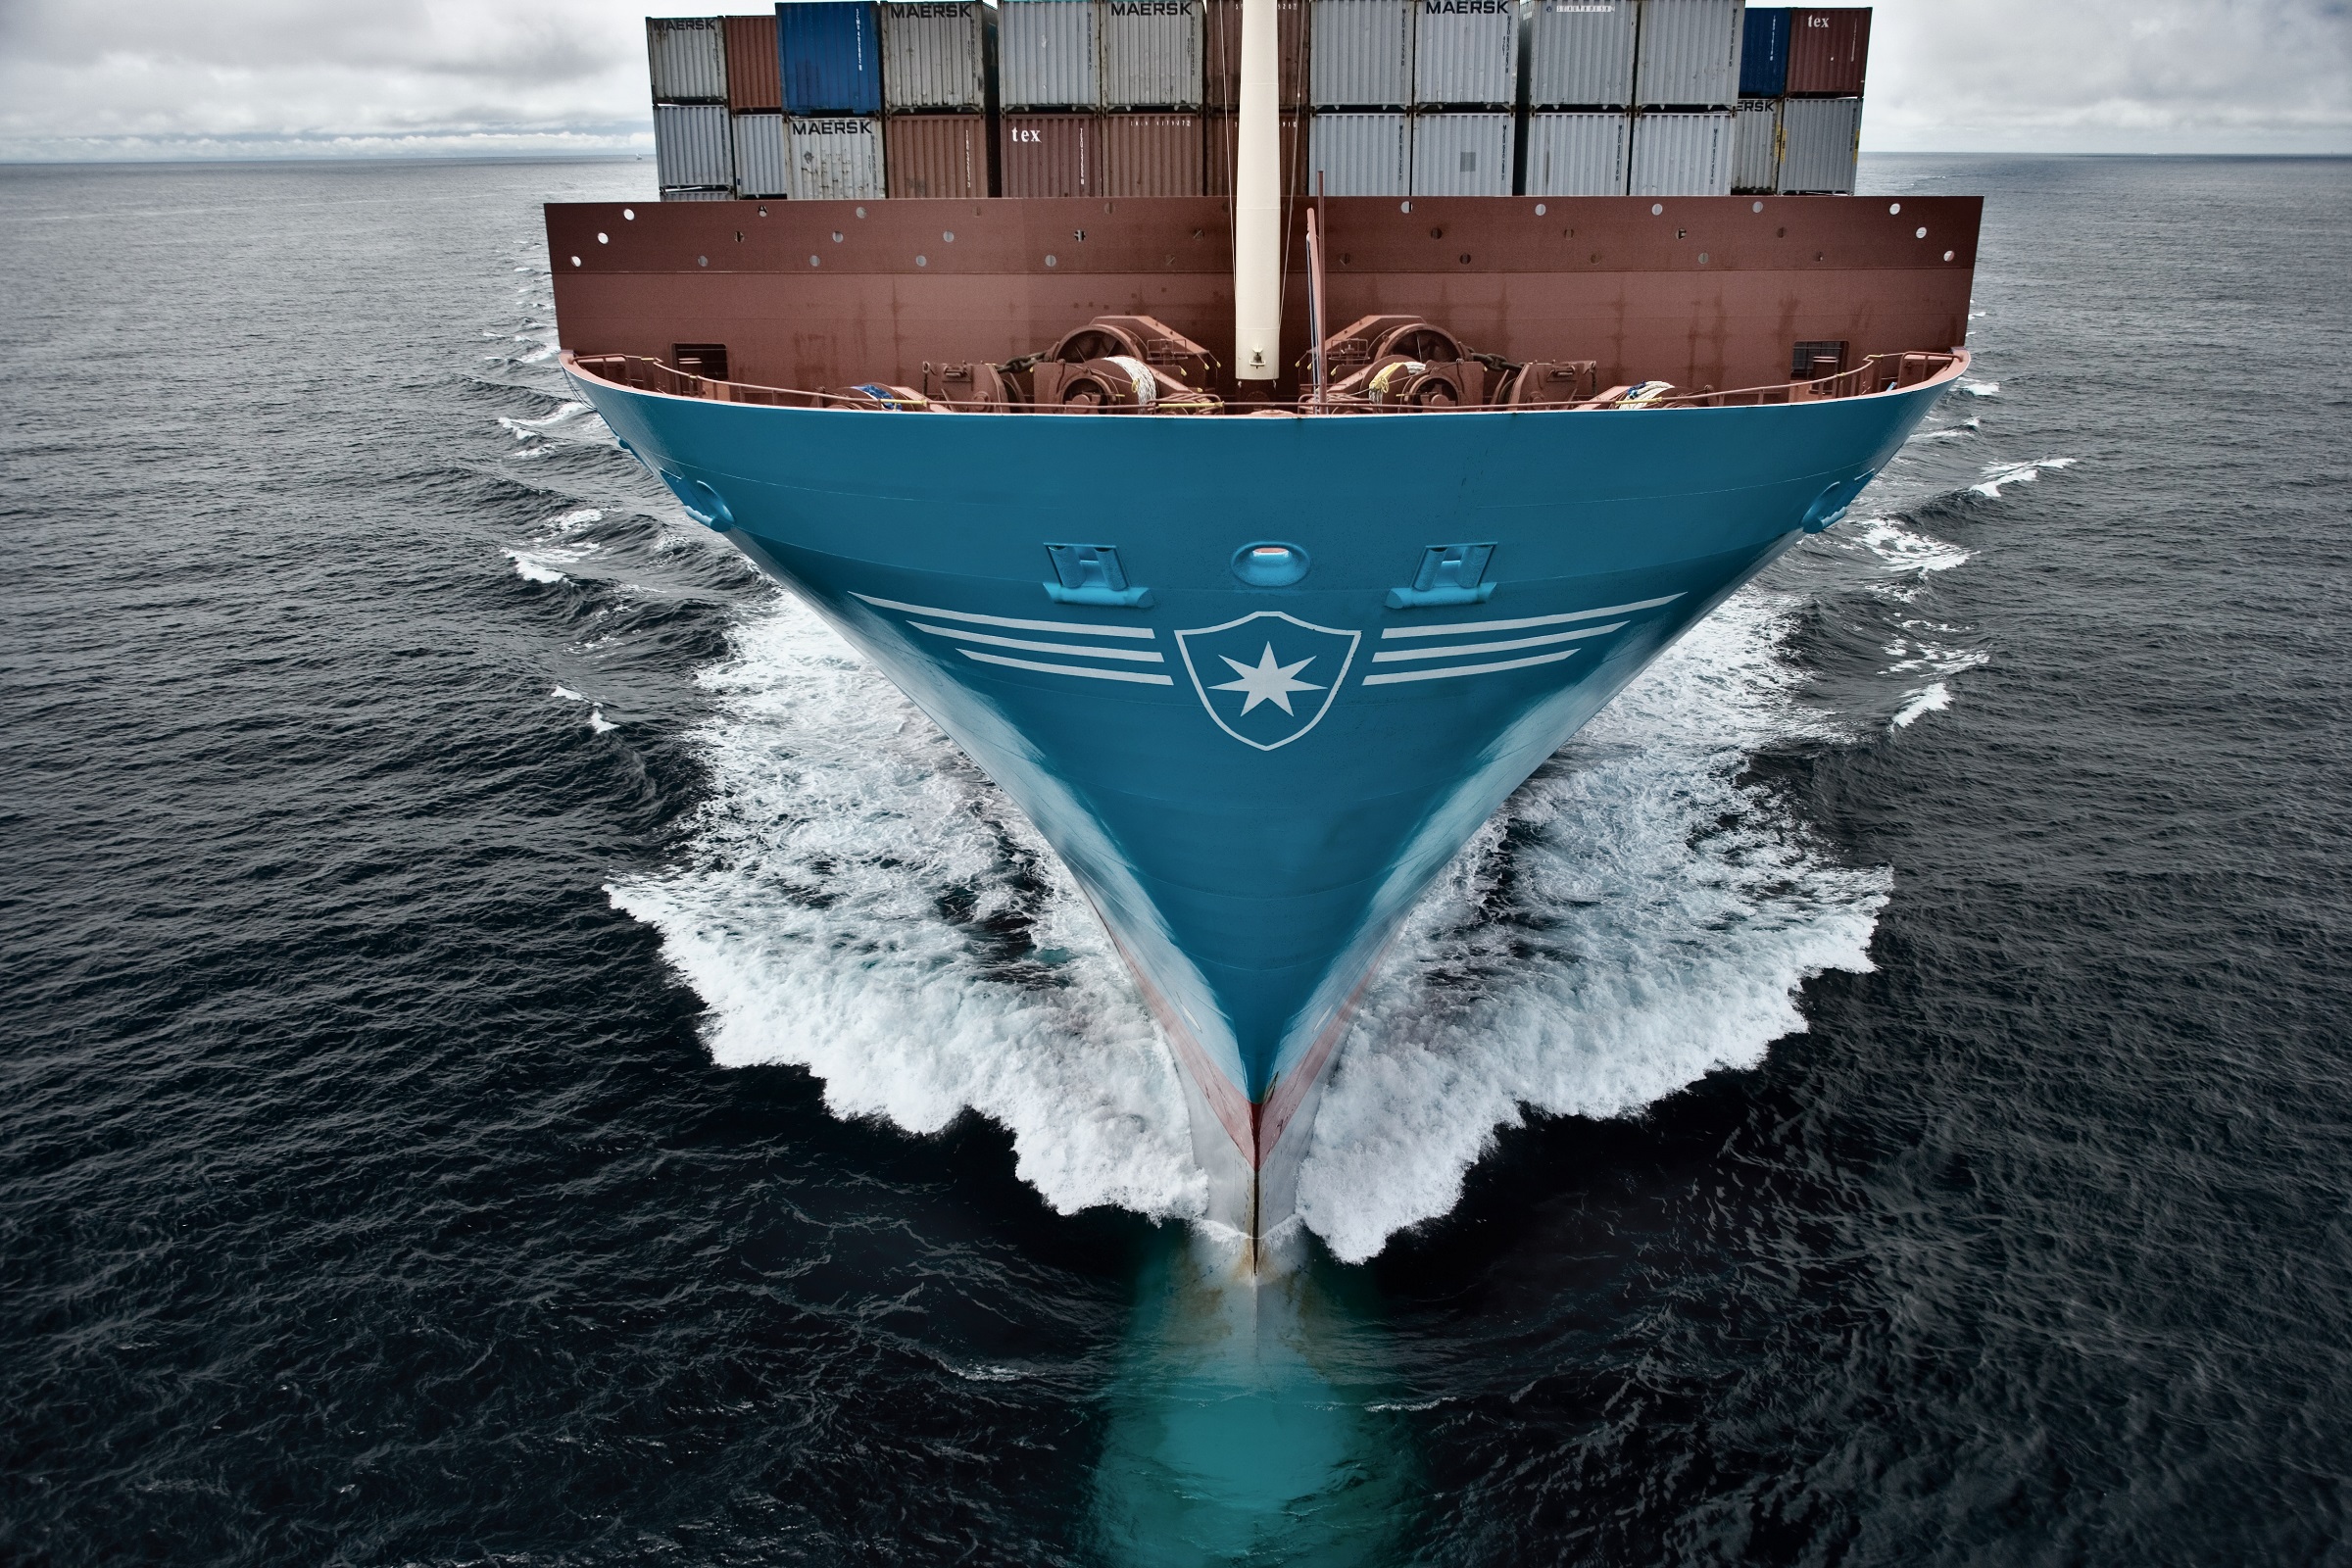 Maersk Line enters deals to recycle eight vessels